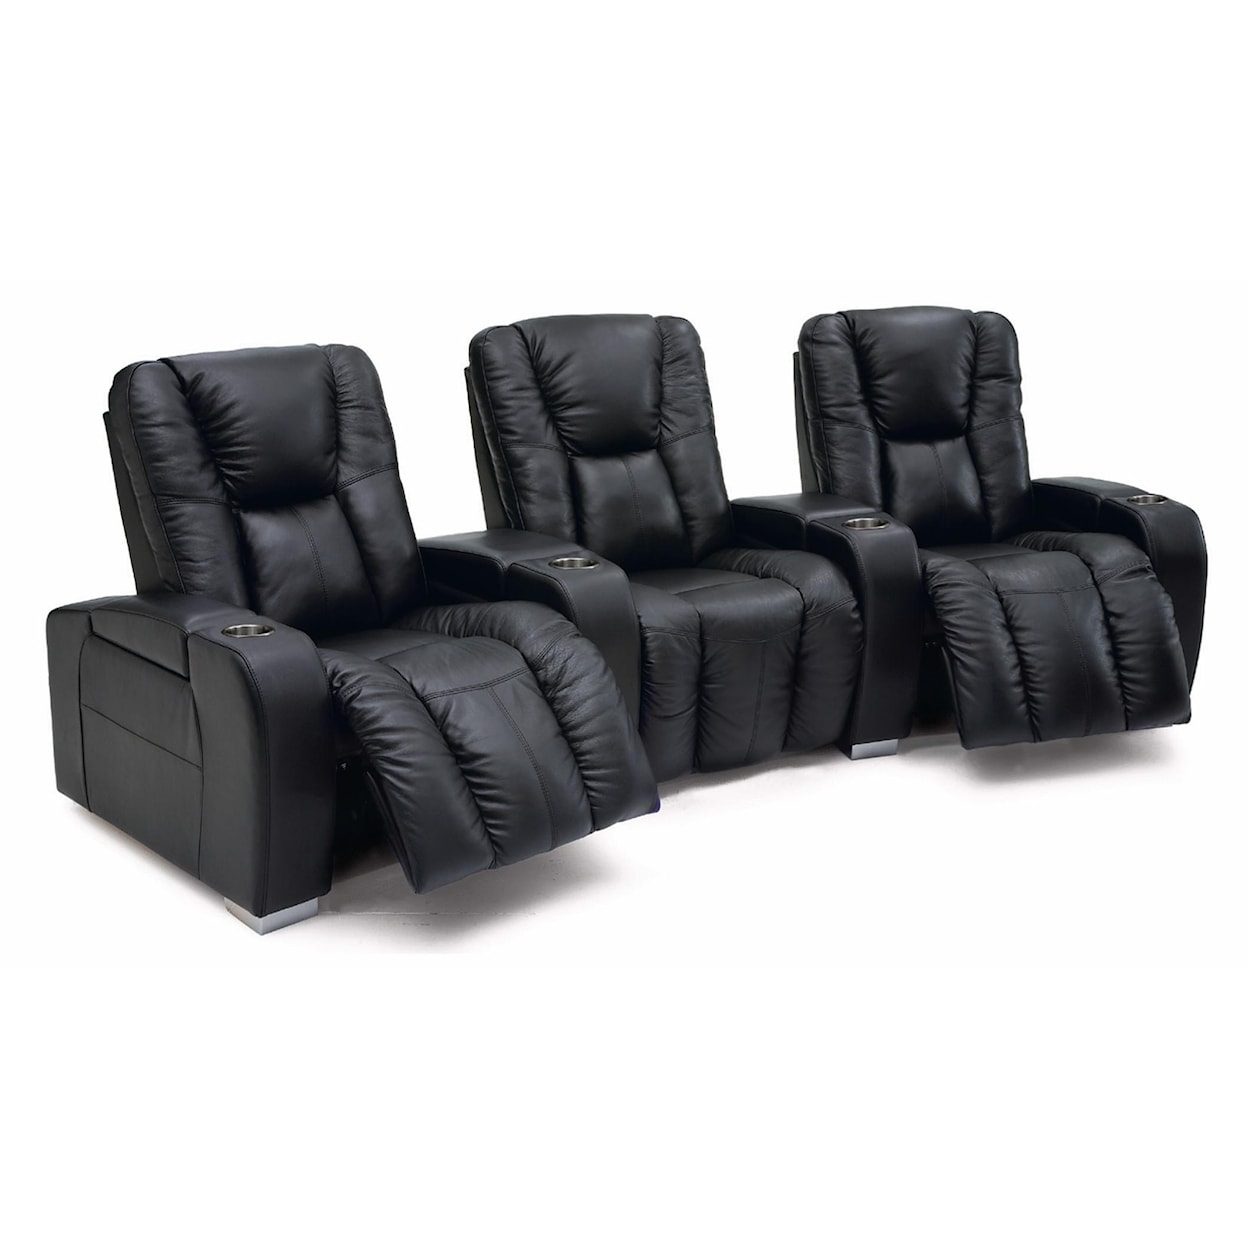 Palliser Media Manual Reclining Home Theater Sectional